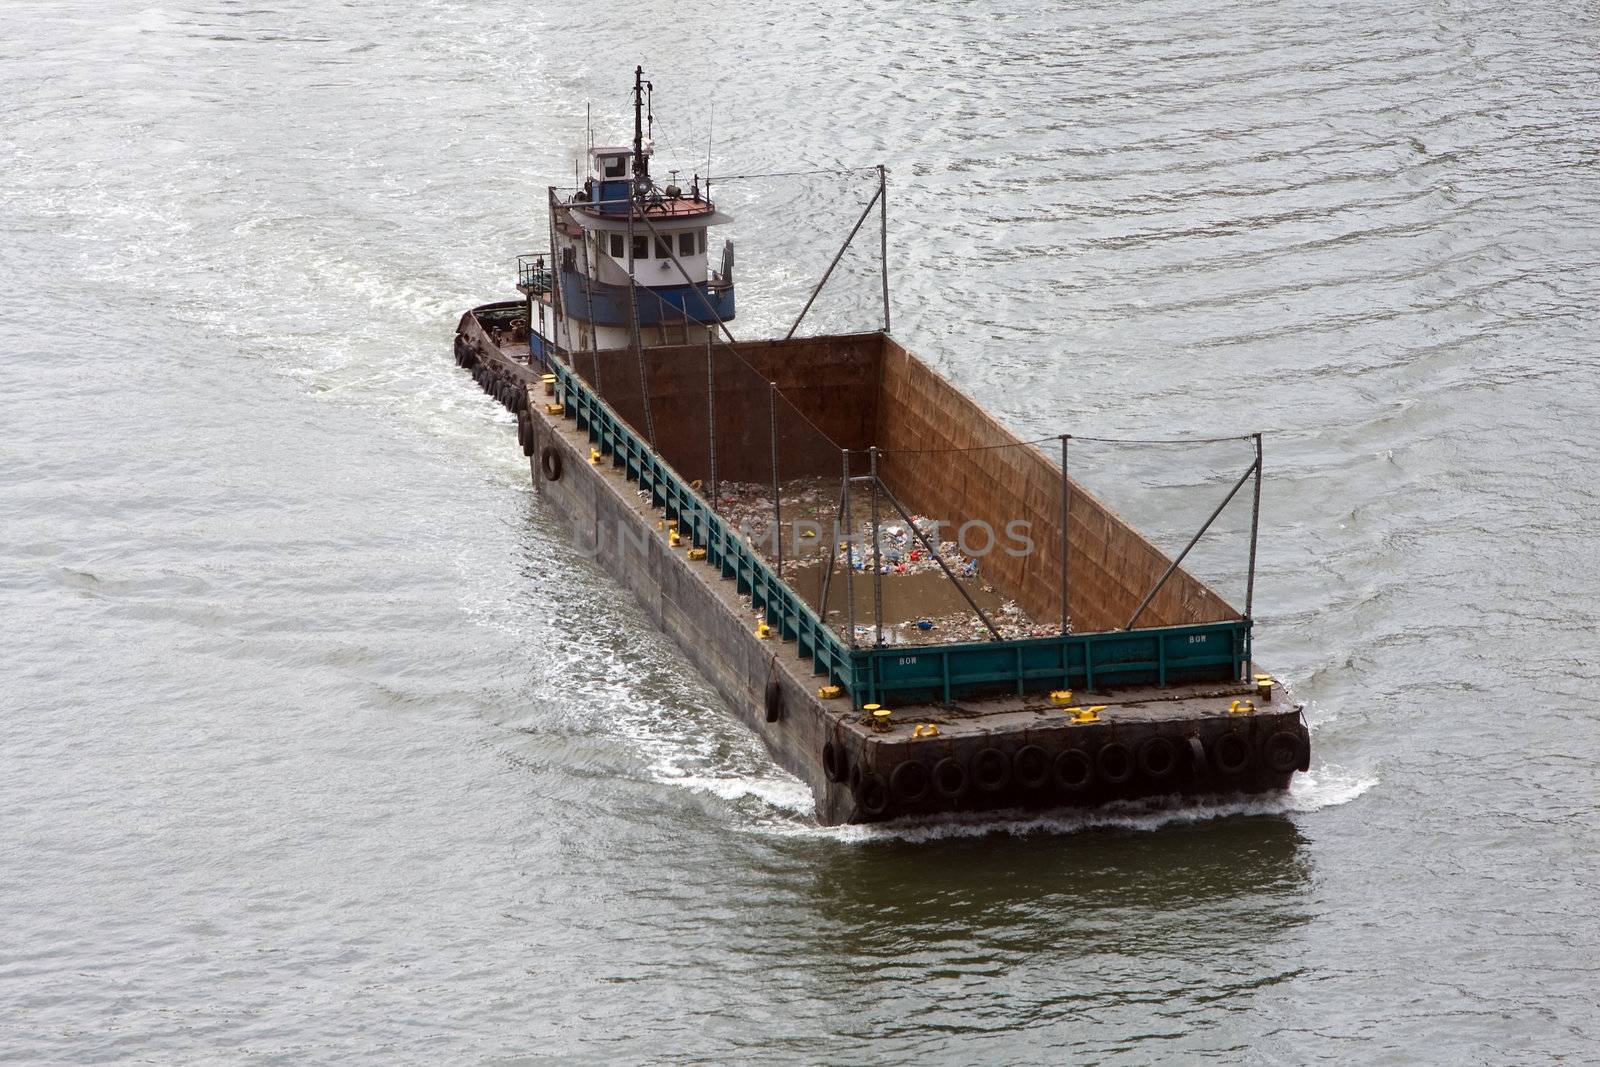 Empty boat for transporting garbage cruising in a river, used for waste management